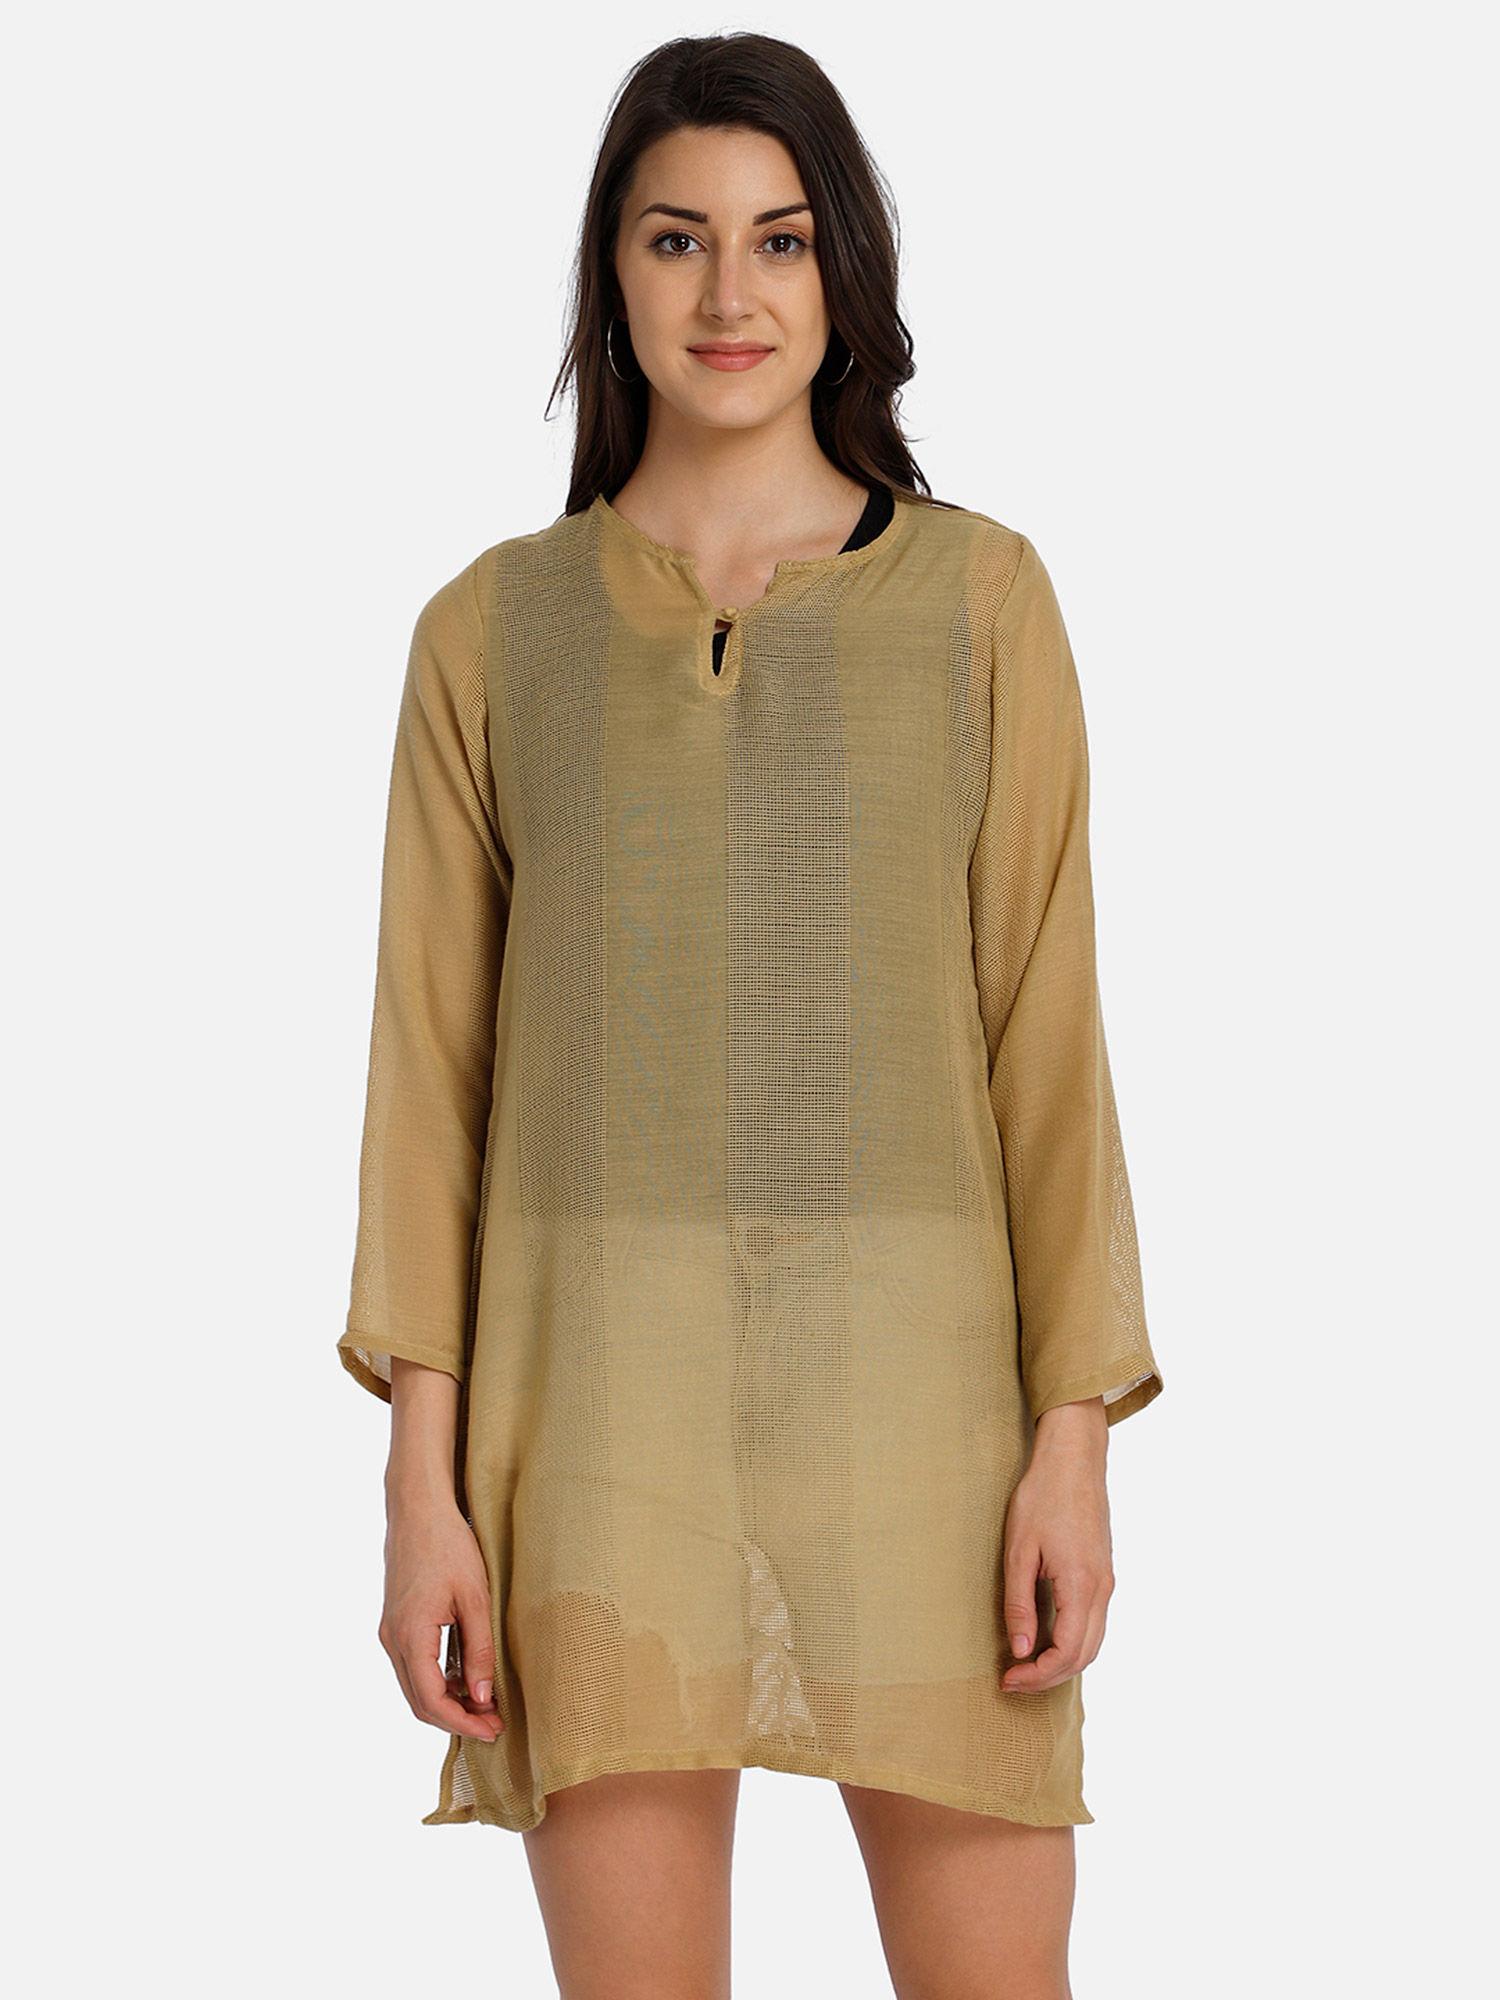 cotton semi-sheer solid beige tunic dress with key-hole neck